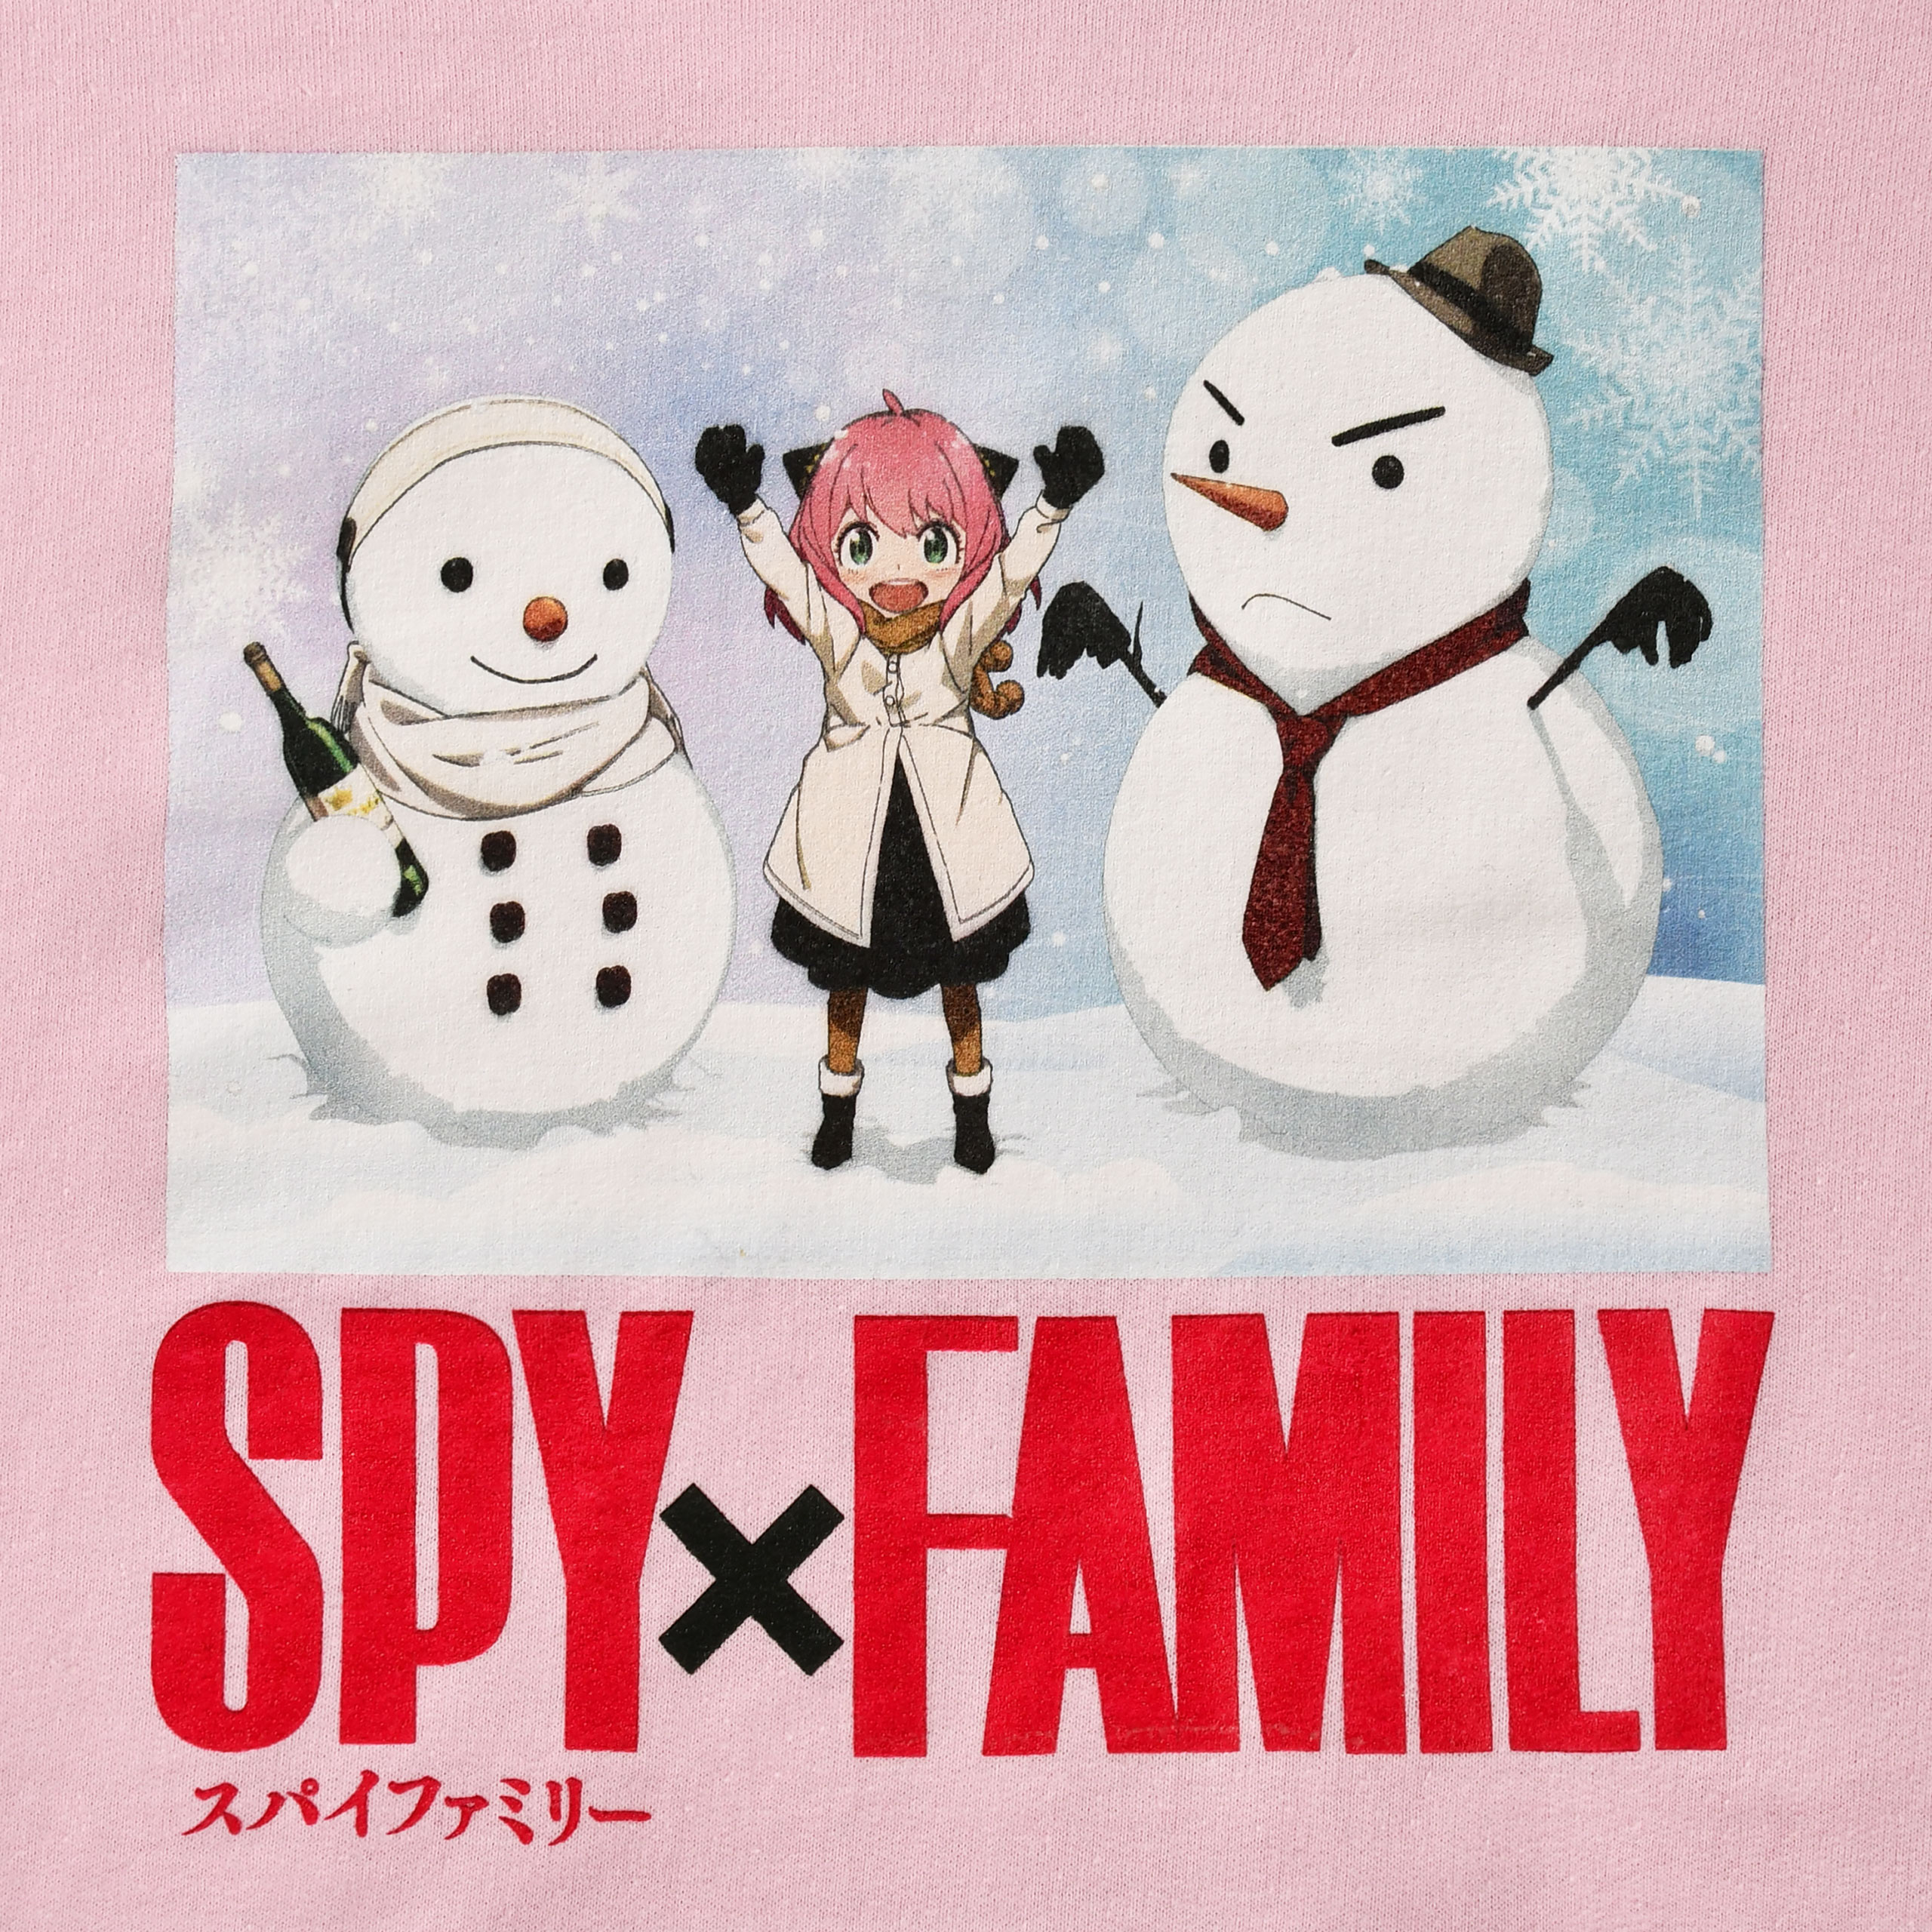 Spy x Family - Anya Forger Hoodie rosa